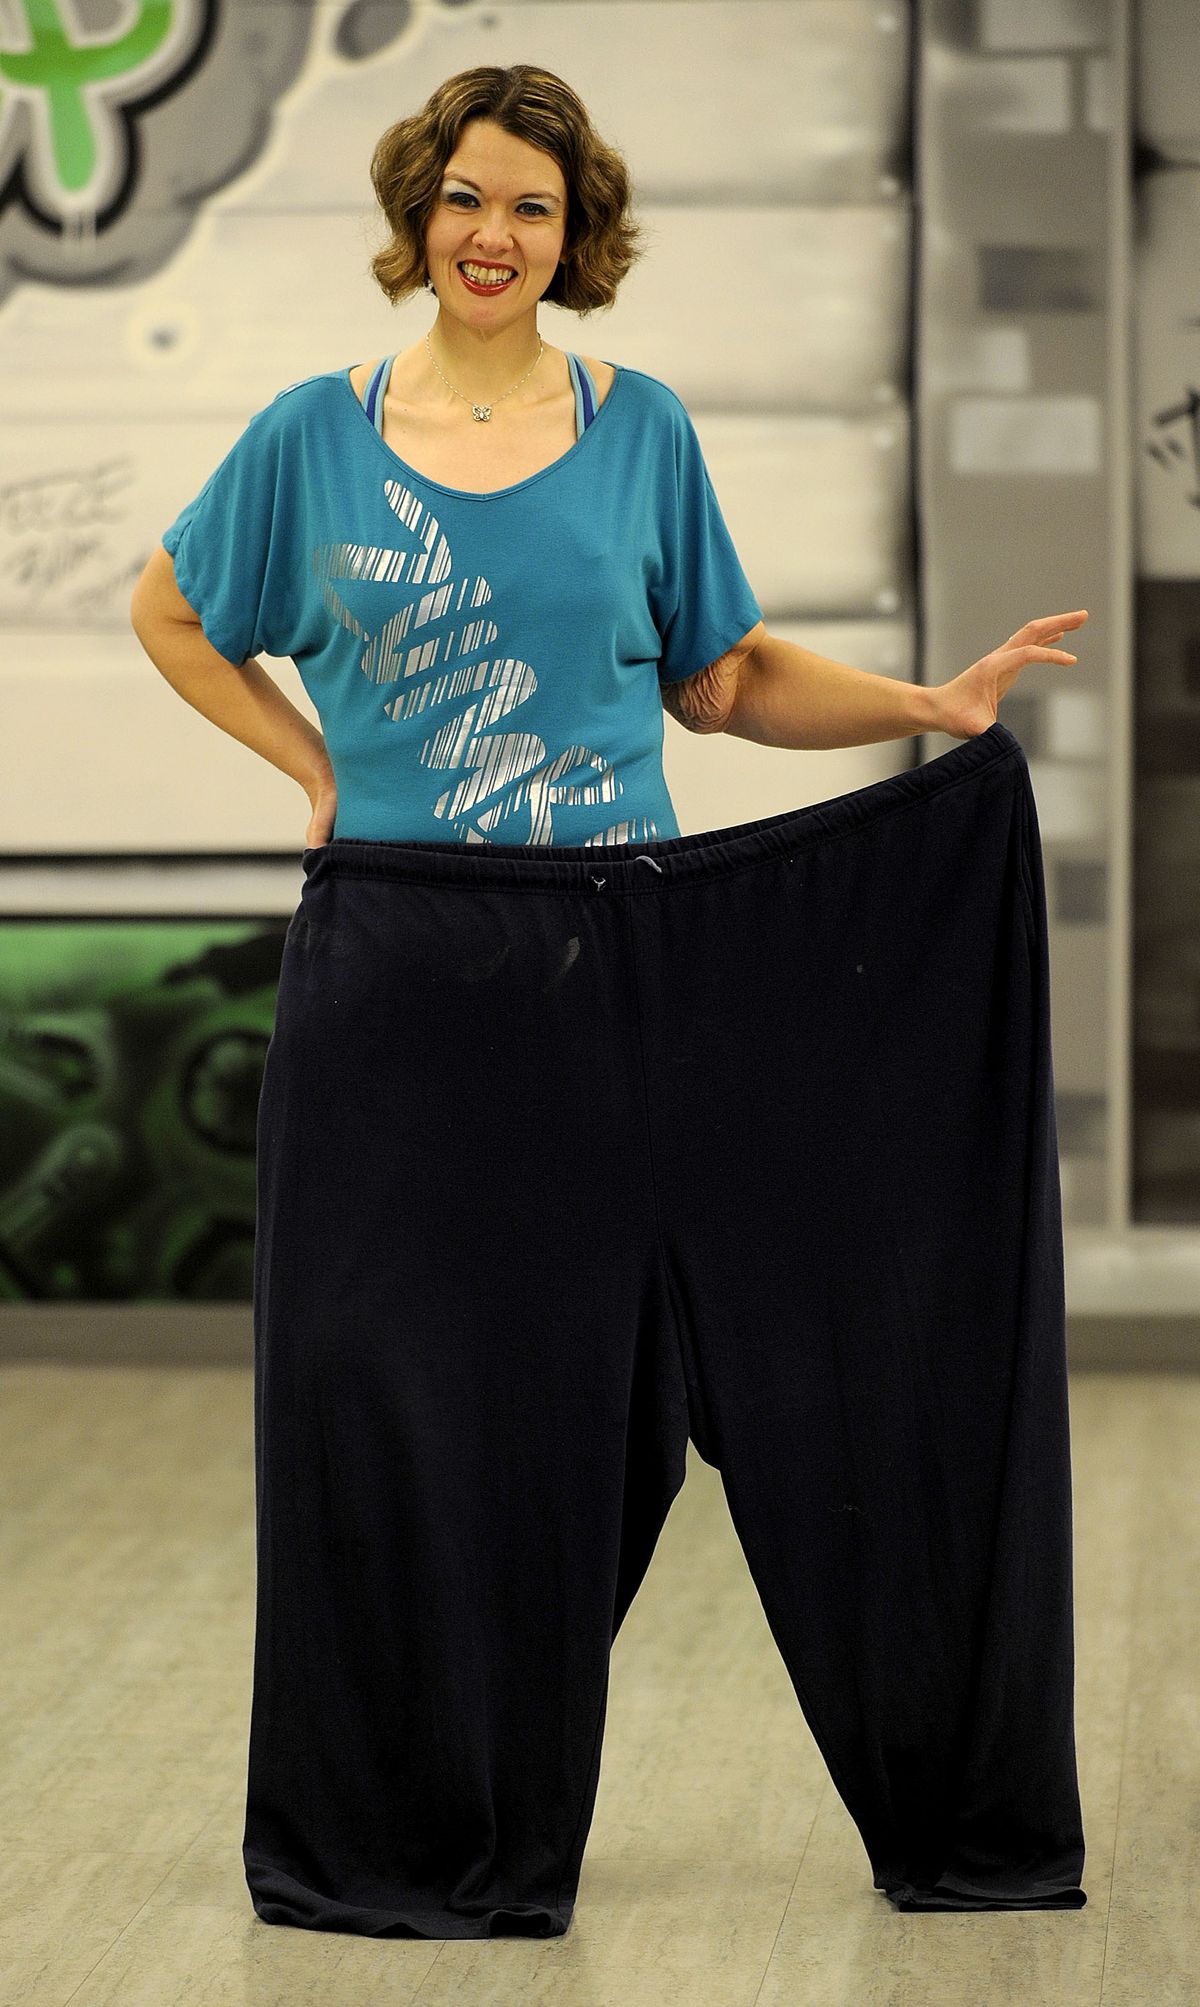 Jenny Duncan shows off her “before pants” at The Body Shop in Coeur d’Alene. She lost more 300 pounds through exercise and Weight Watchers. (Kathy Plonka)